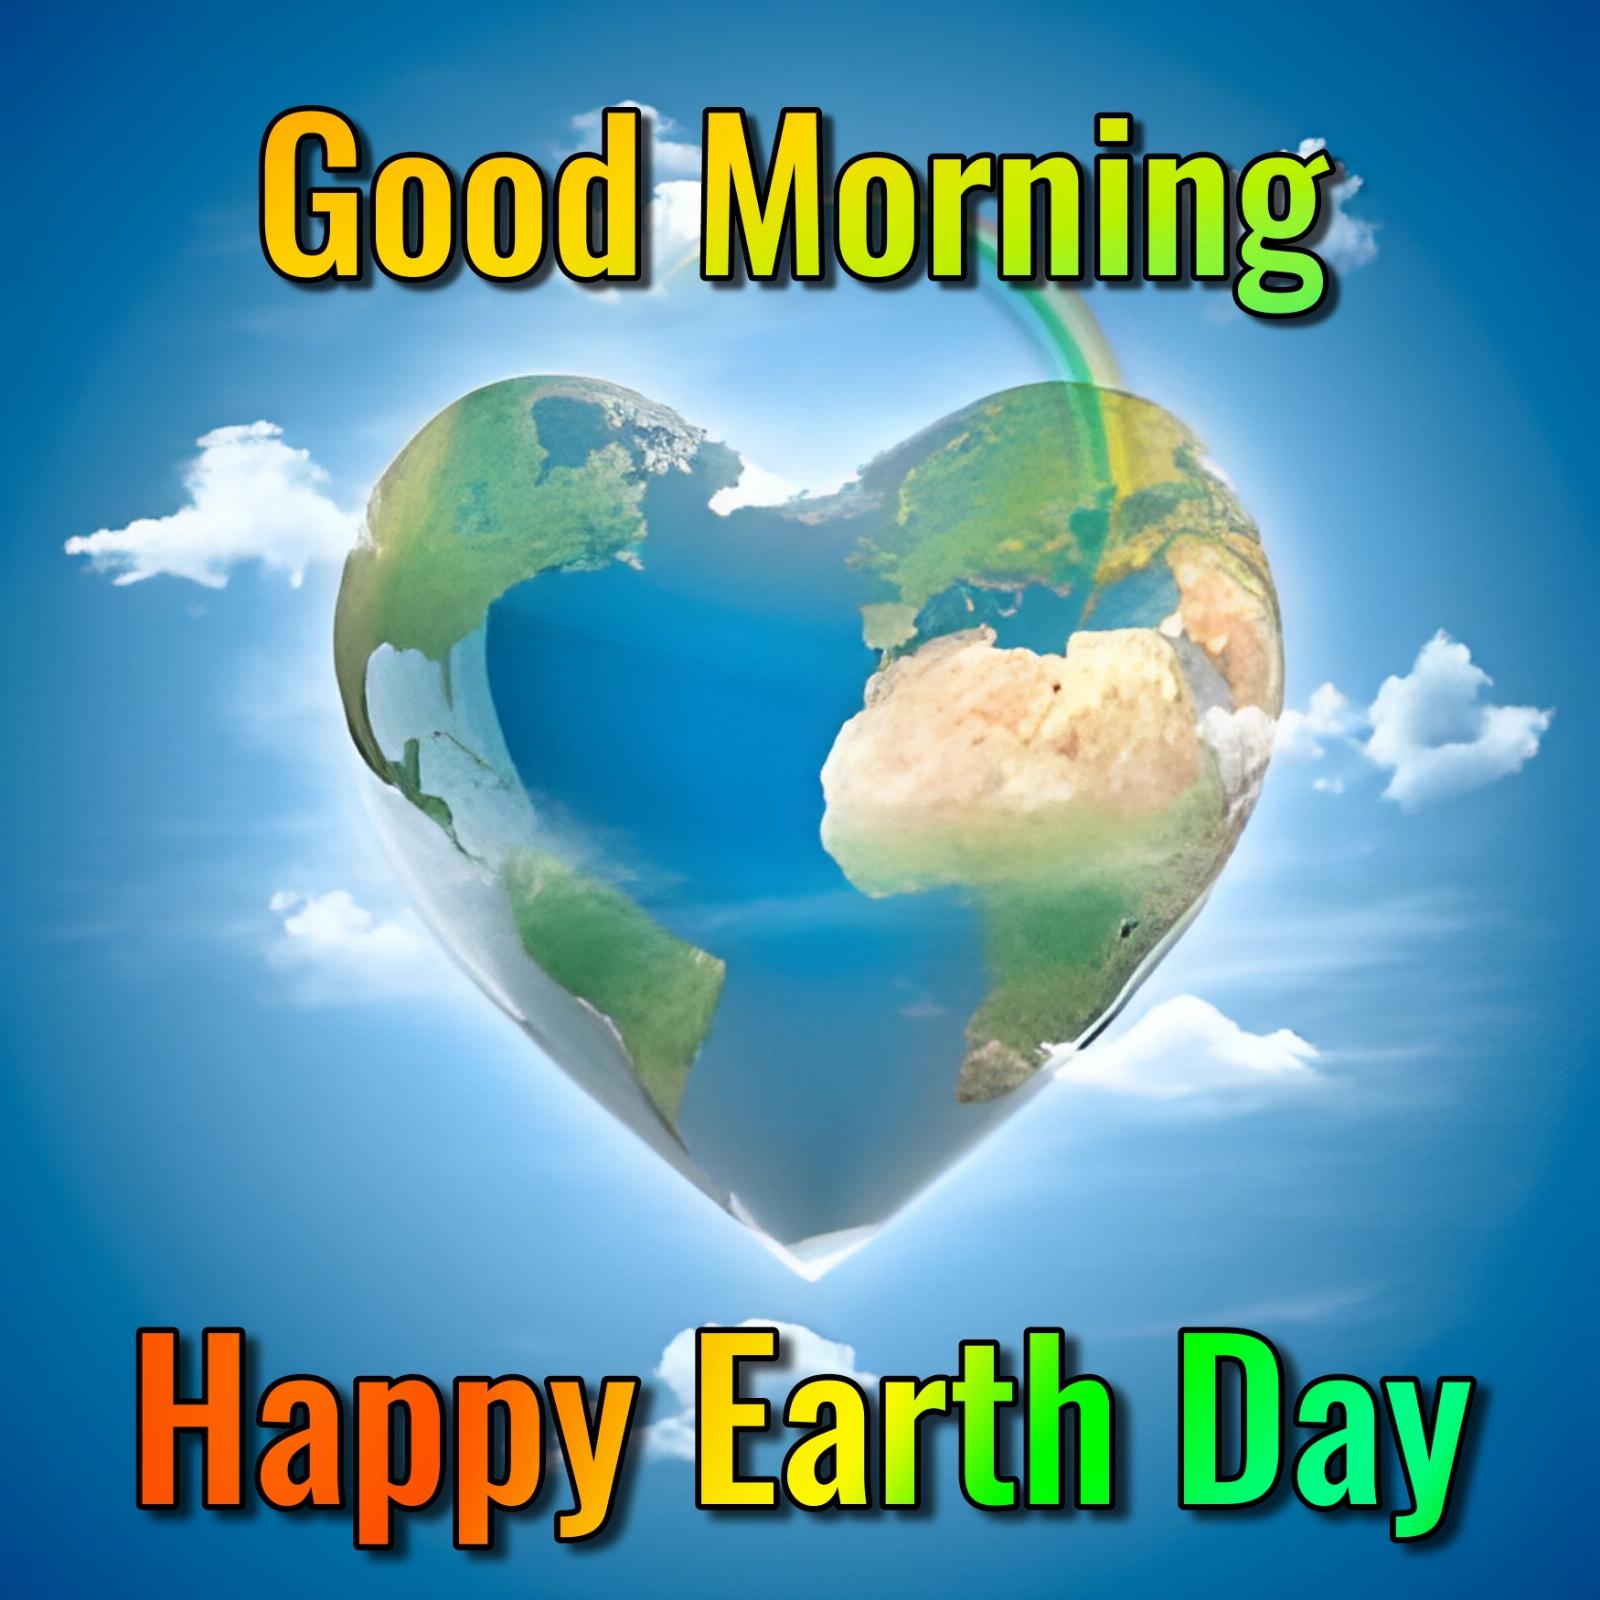 Good Morning Happy Earth Day Images